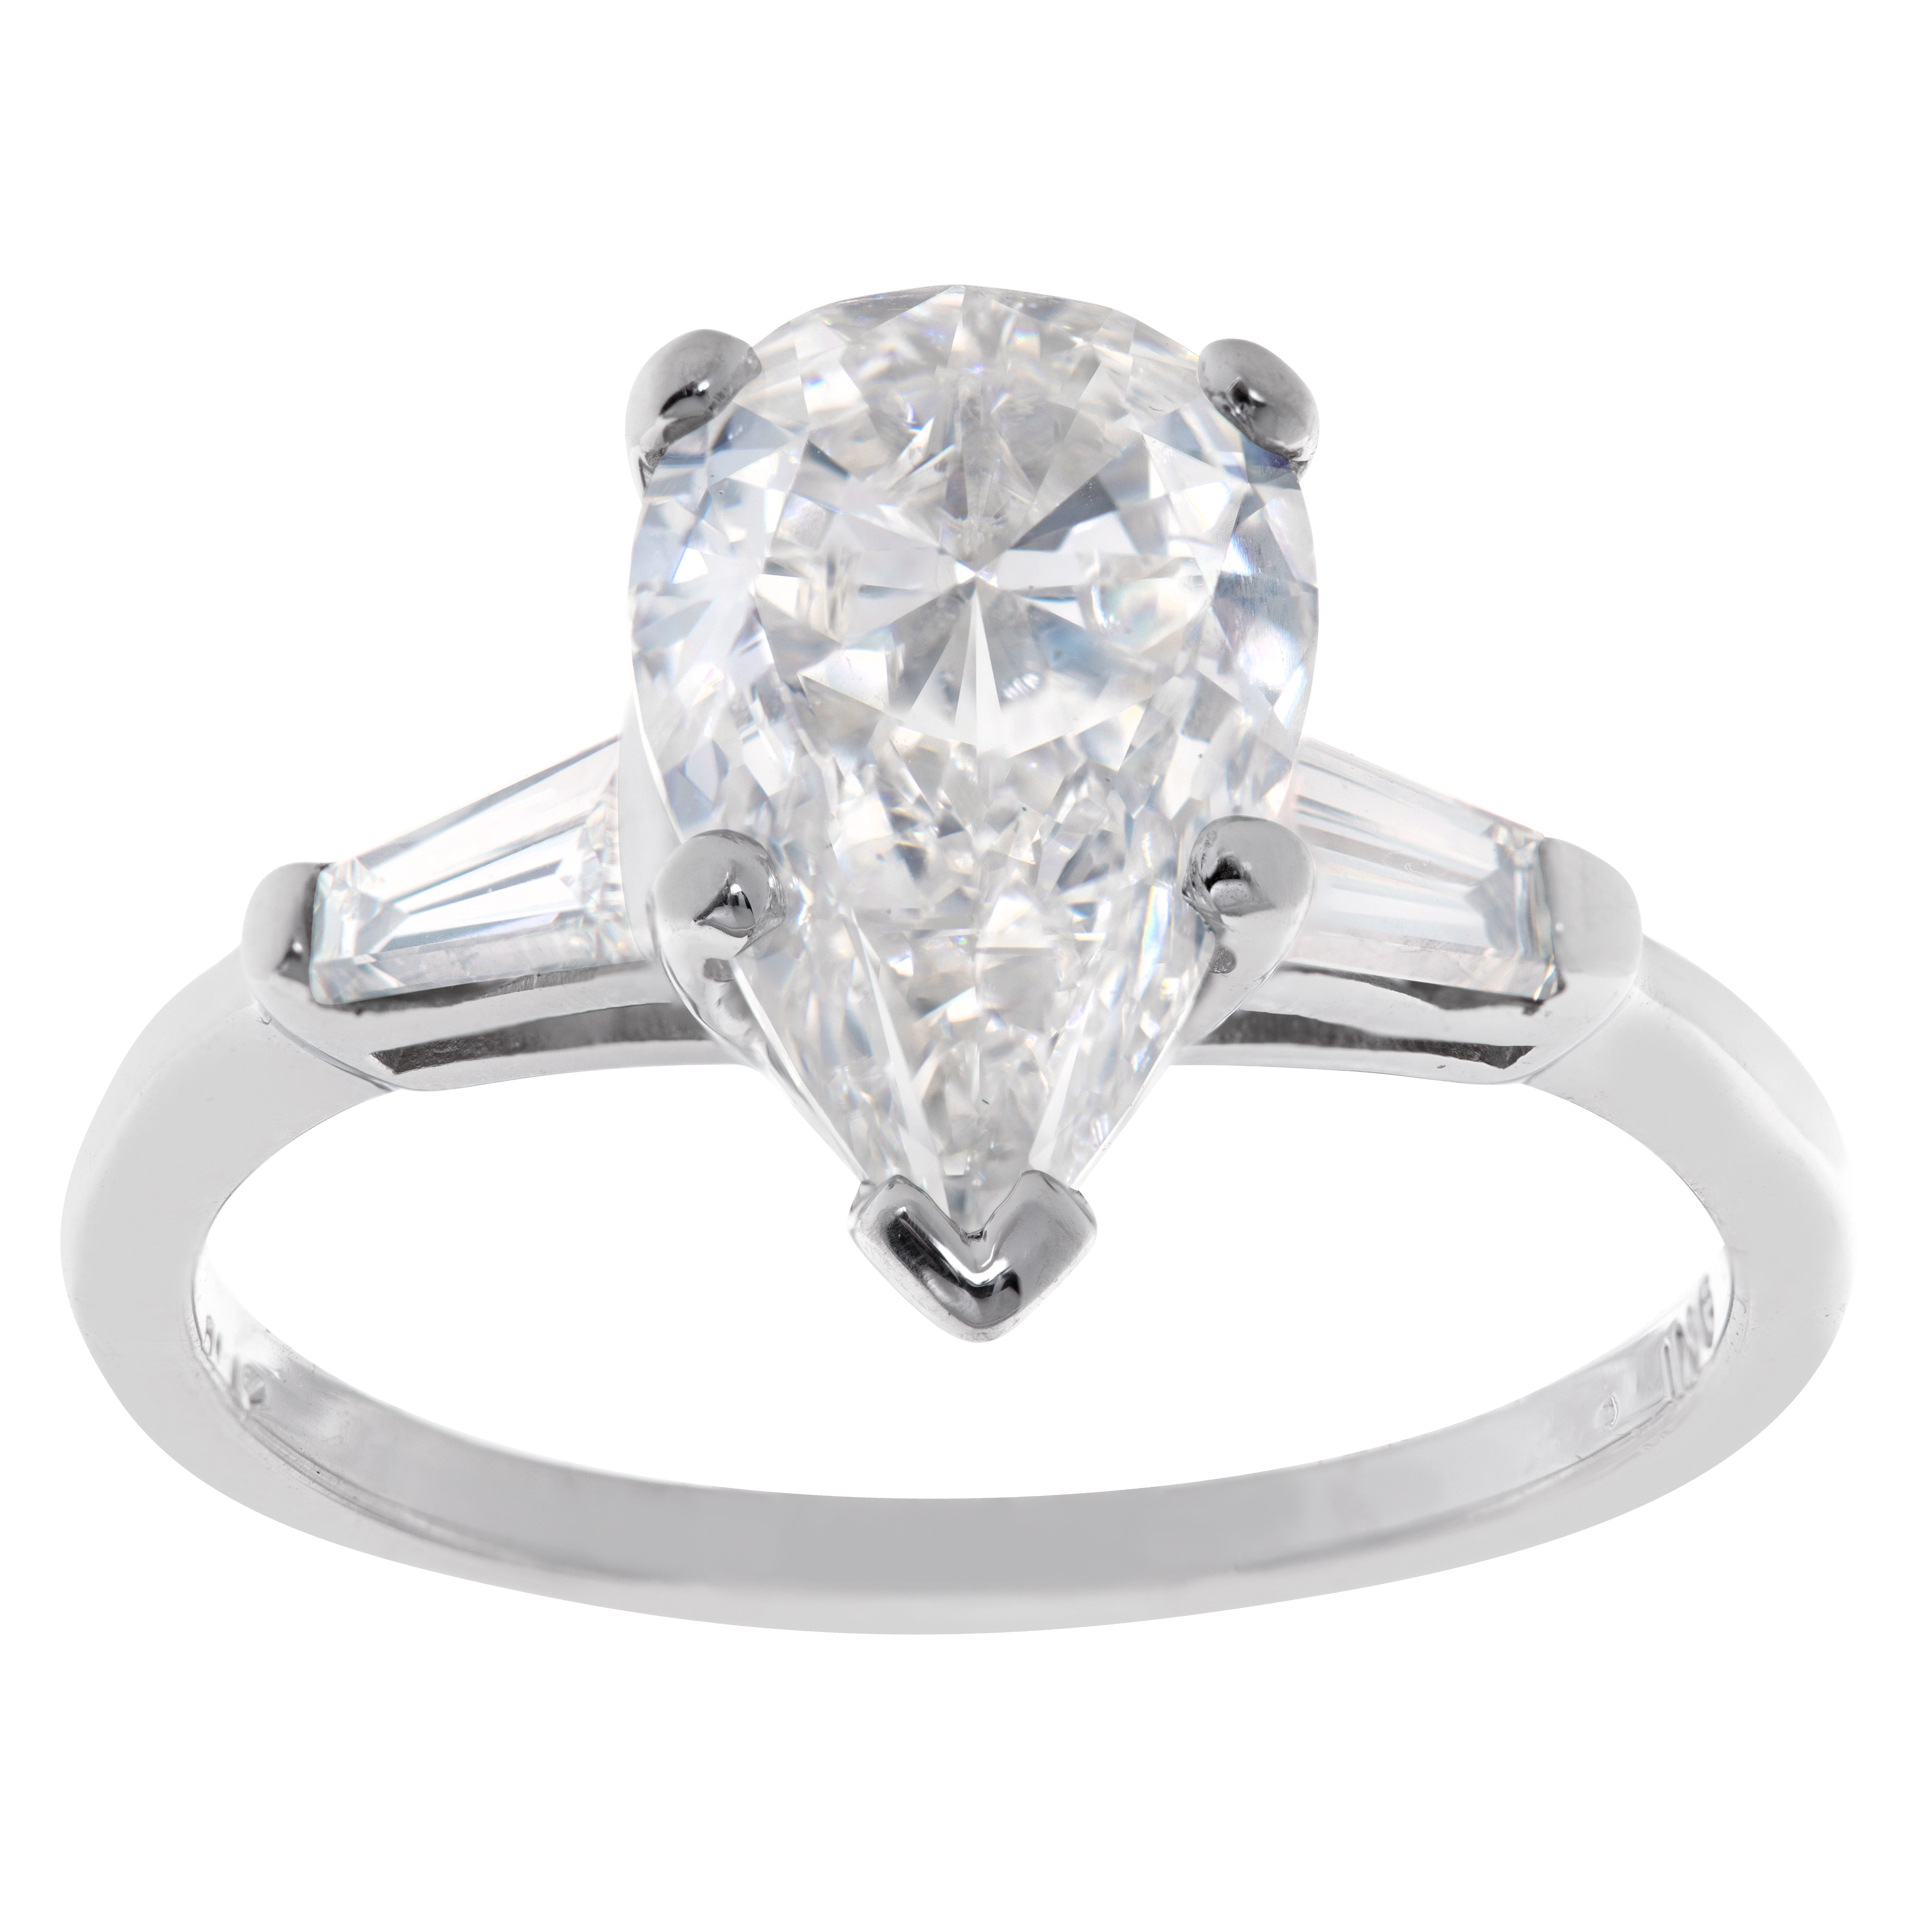 GIA Certified pear shaped diamond ring with 2.08 carat diamond (I color, VS2 clarity). in platinum setting image 1